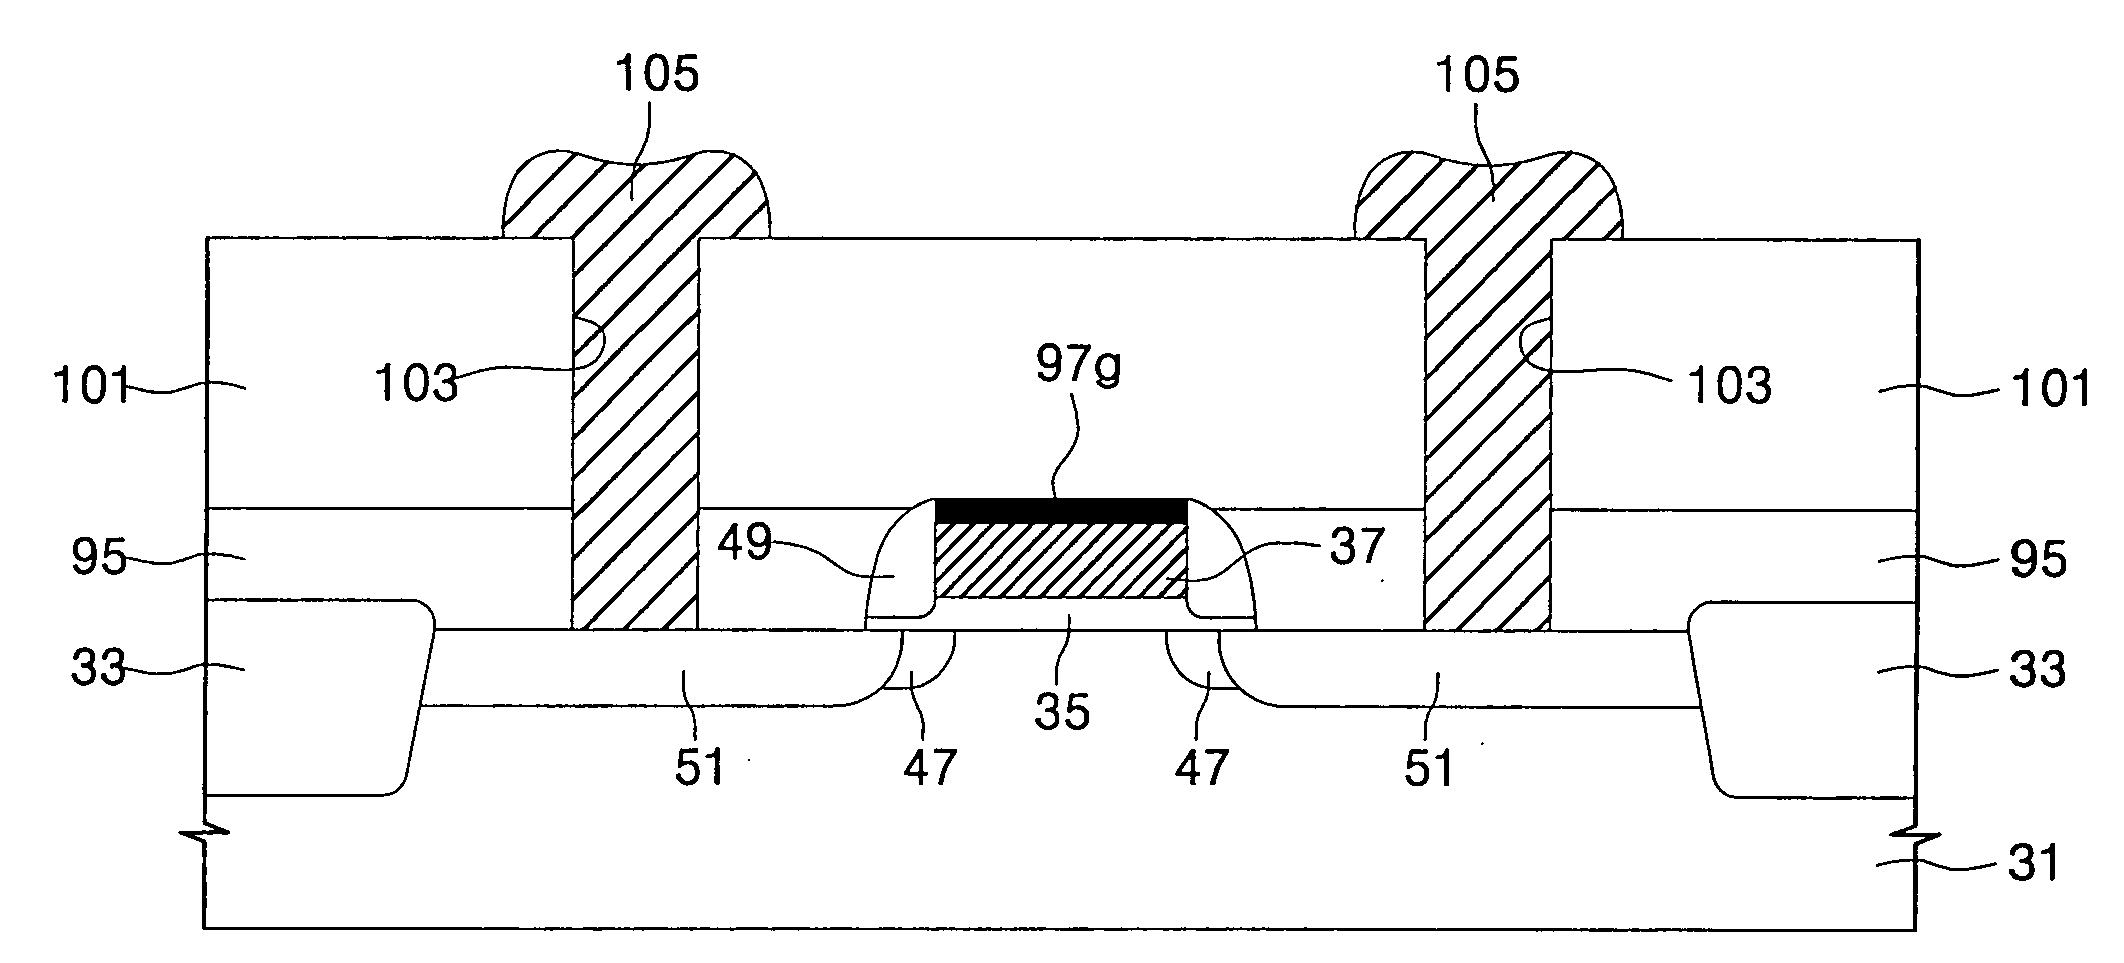 Nickel salicide processes and methods of fabricating semiconductor devices using the same